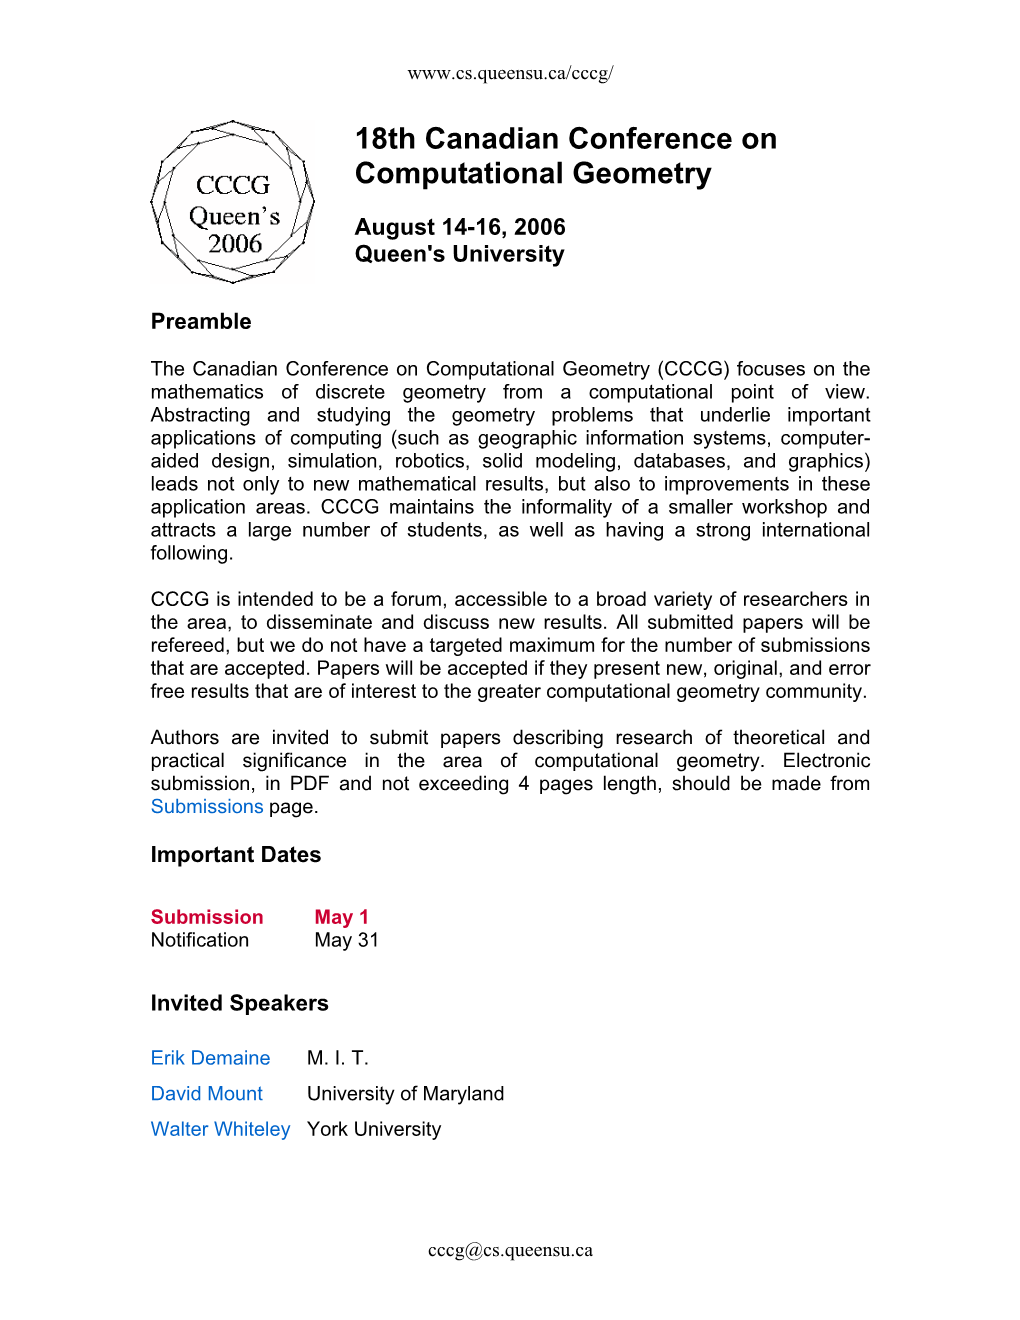 18Th Canadian Conference on Computational Geometry